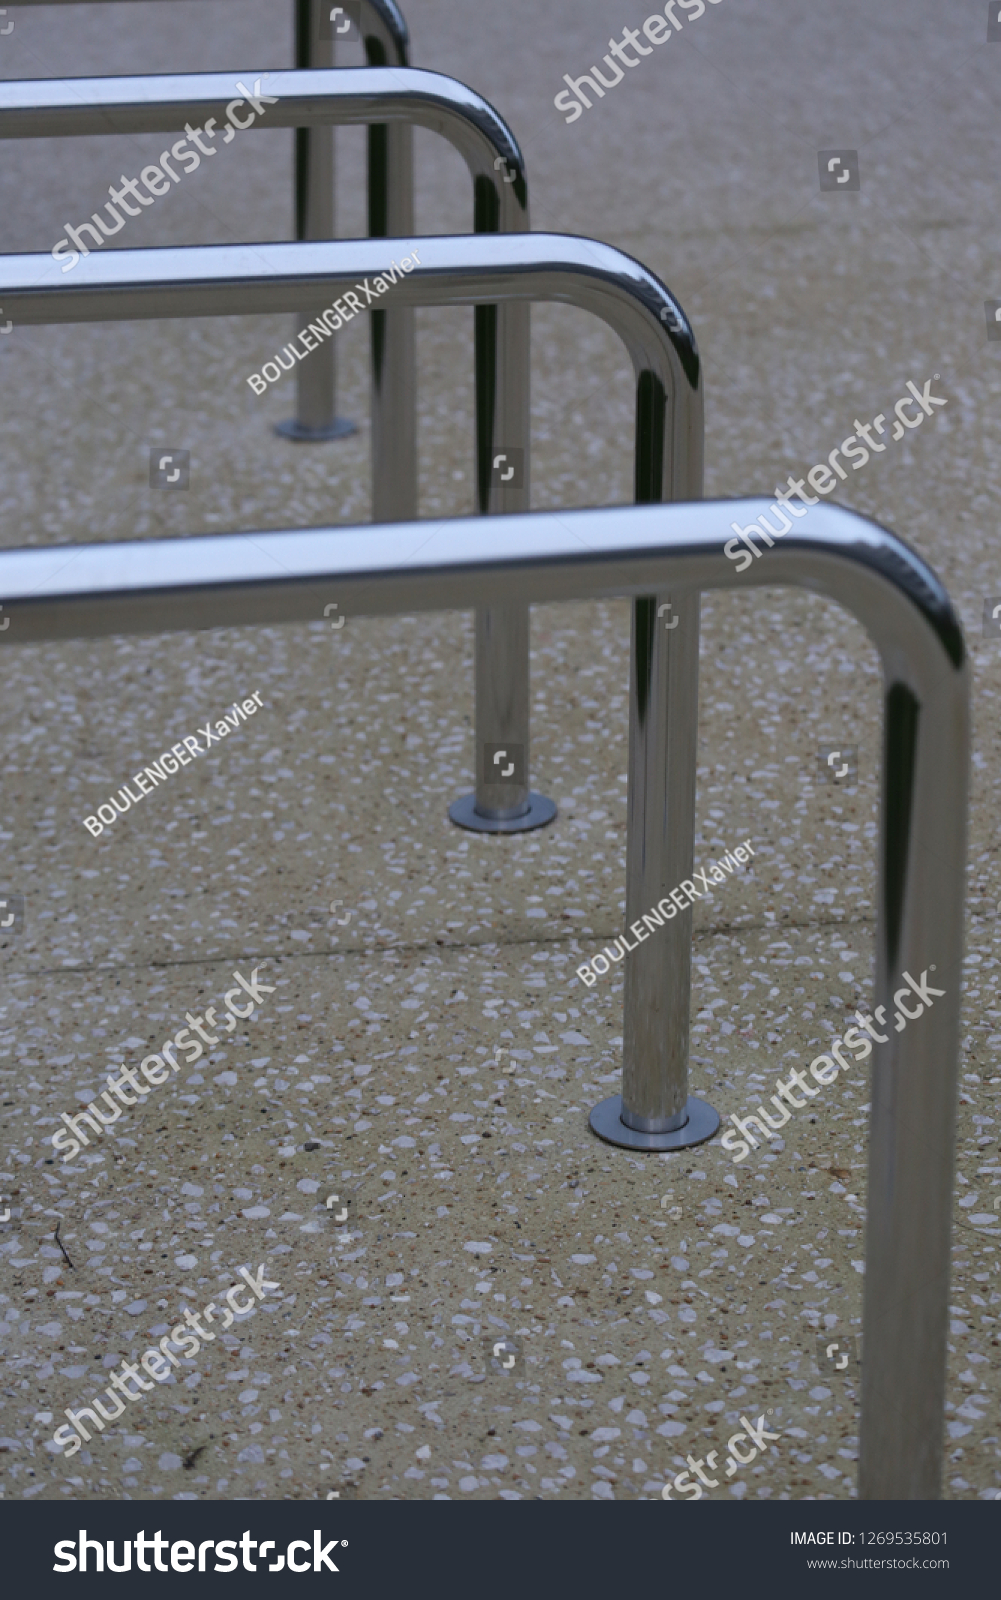 Close up view of pattern of curved inox tubes used to place bikes in a french city. Abstract urban image with curving lines. Metallic lighted objects with vertical and horizontal shapes.   #1269535801